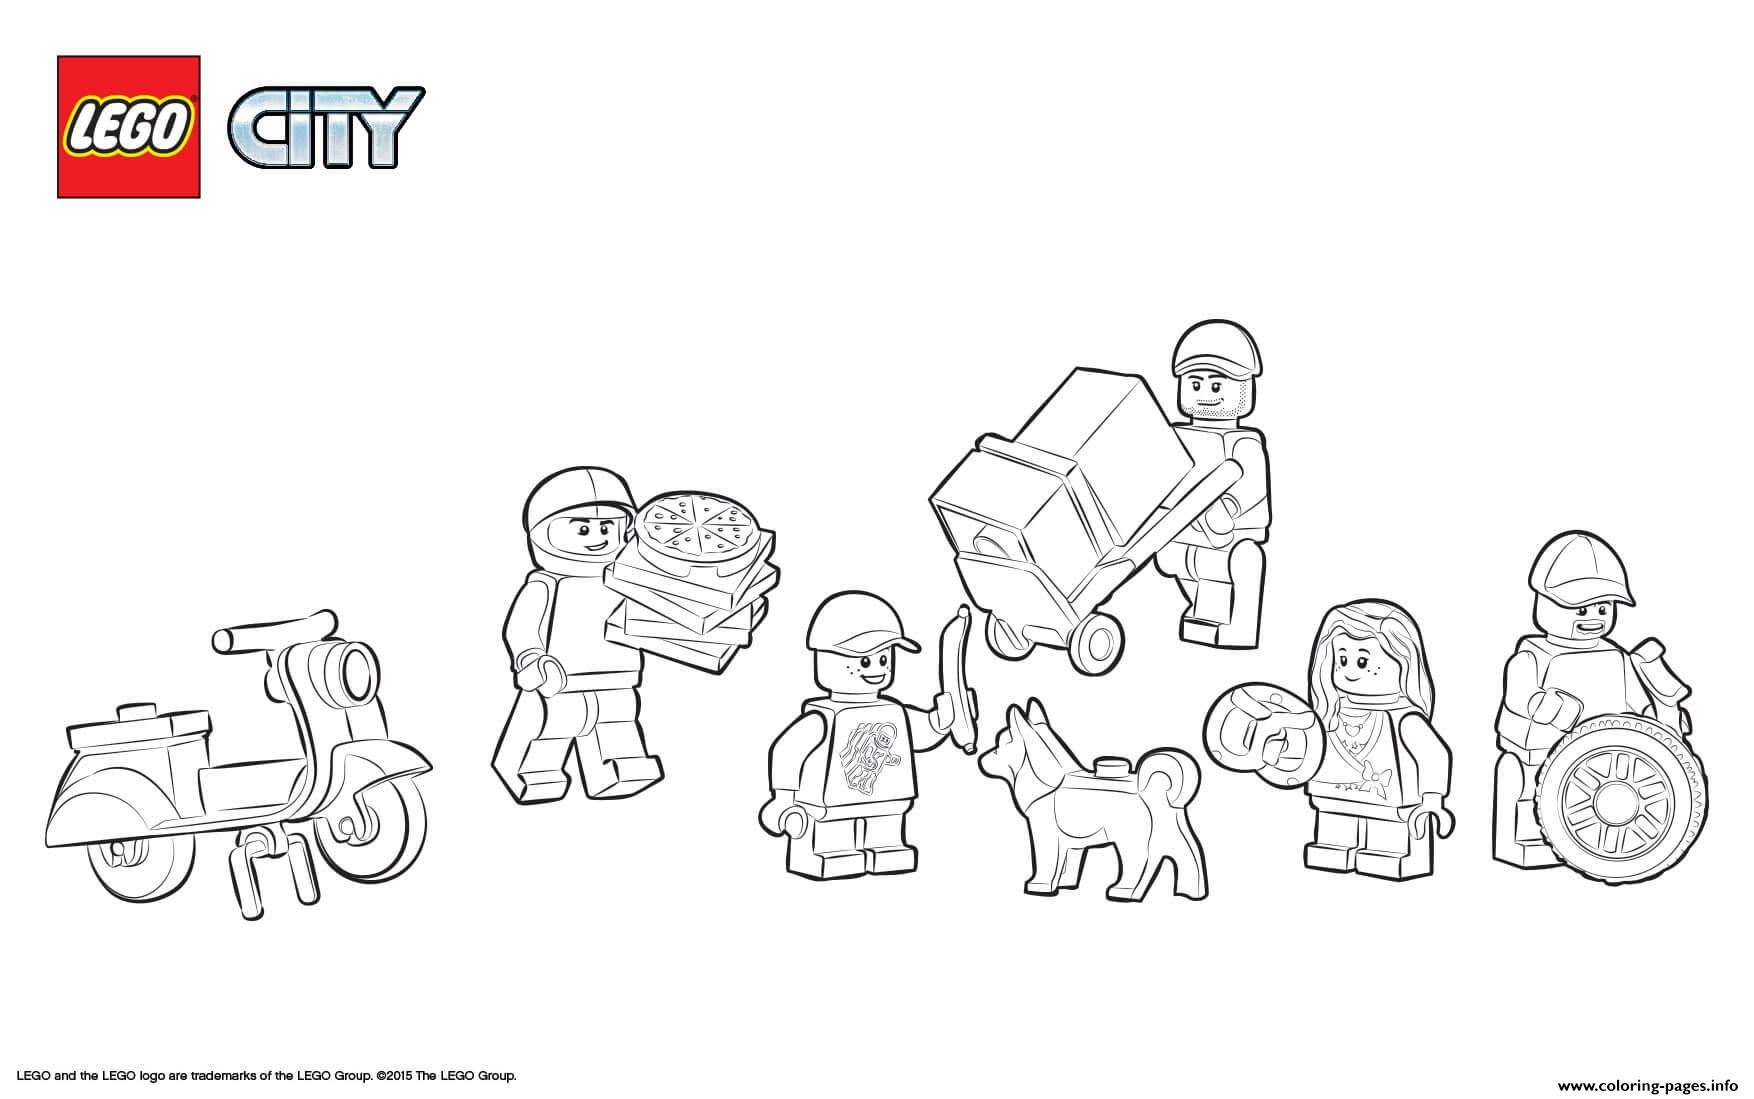 lego city square skooter pizza dog coloring pages printable joseff of hollywood coloriage de bijoux fantaisie